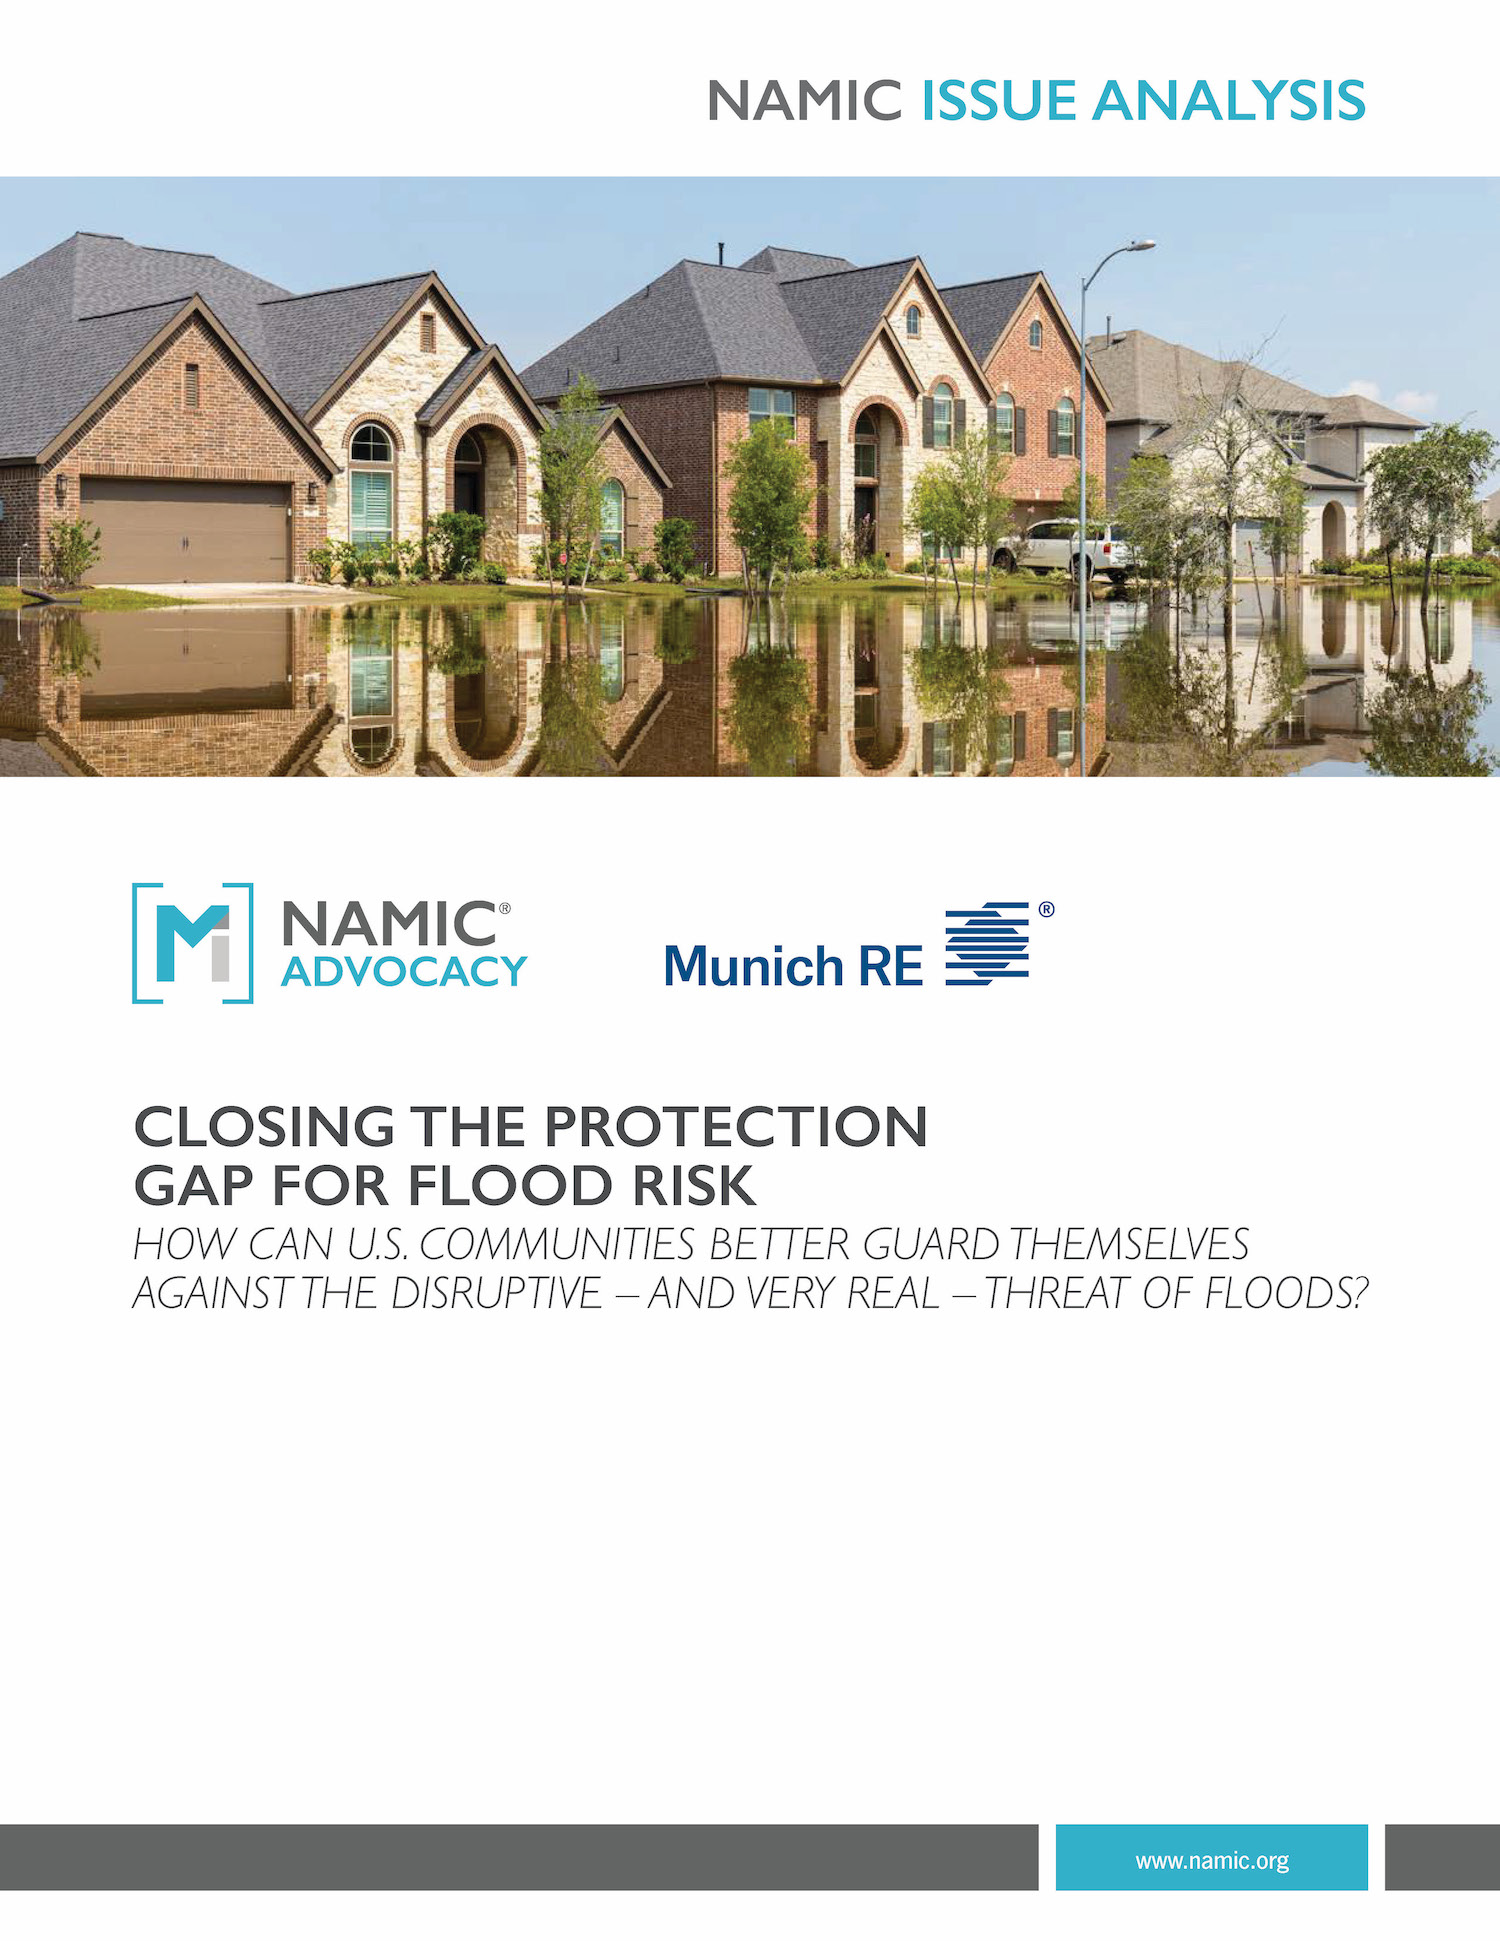 Closing the protection gap for flood risk. How can U.S. communities better guard themselves against the disruptive – and very real – threat of floods? PDF